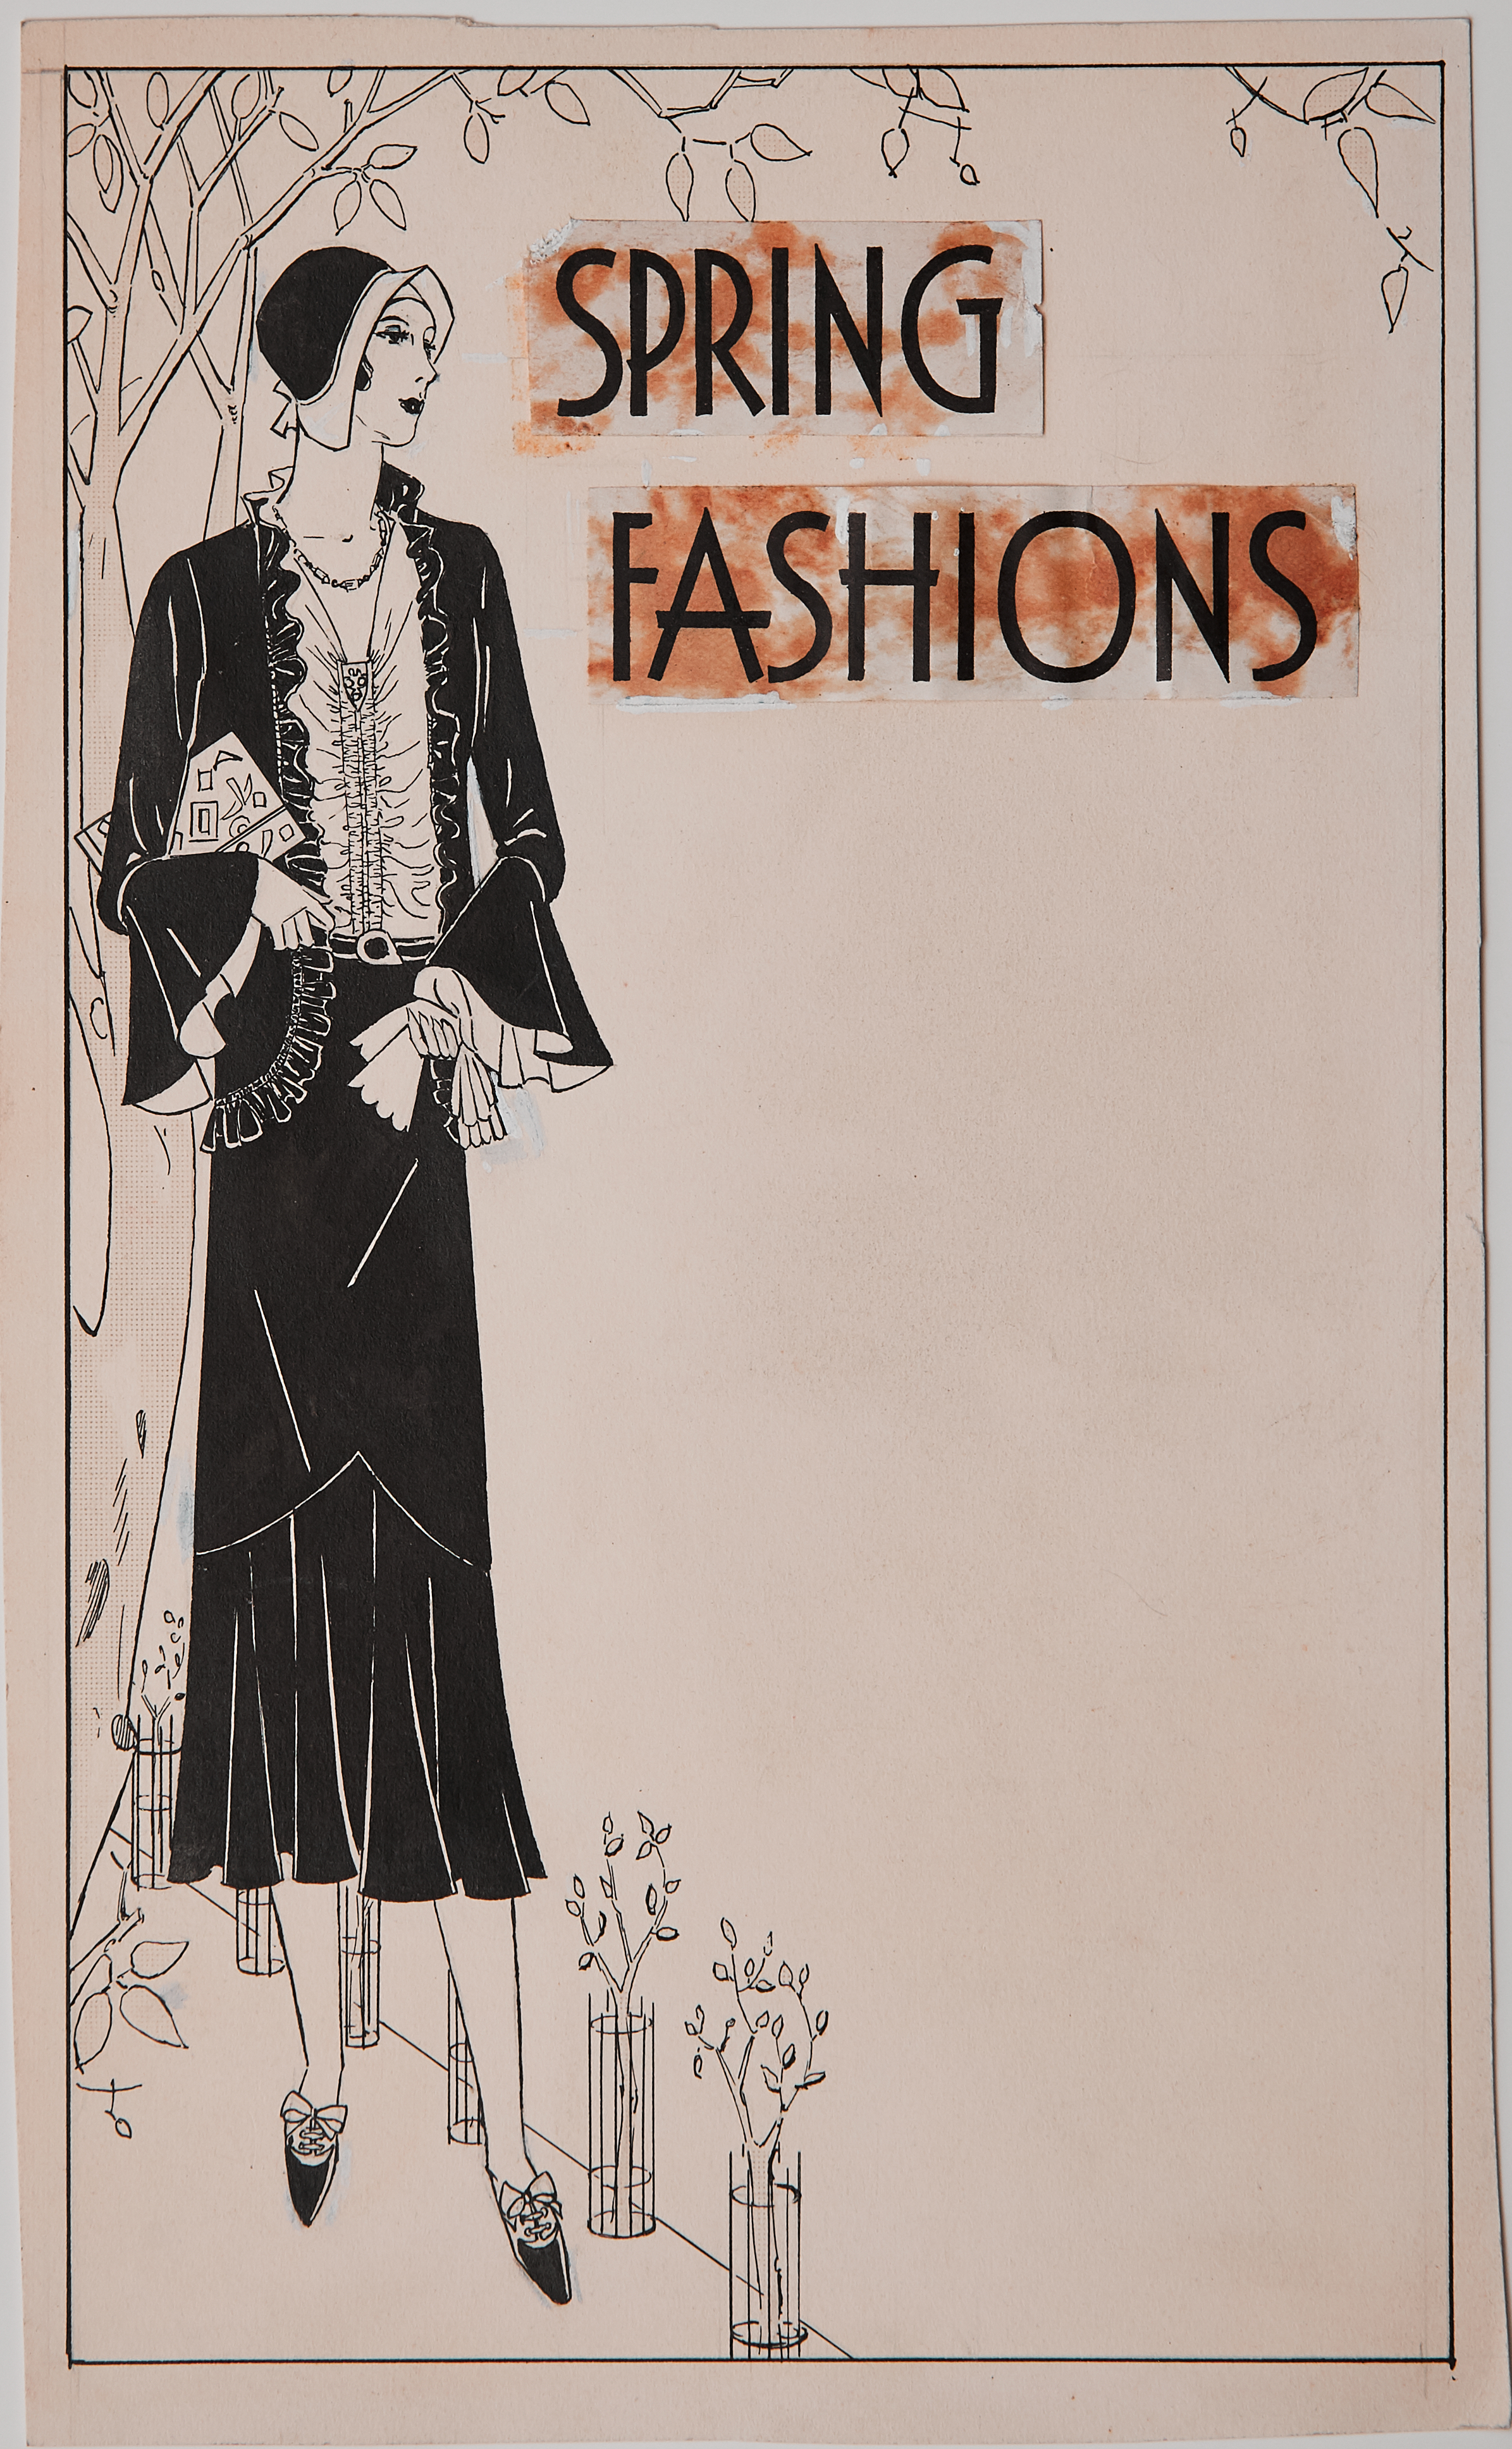 Fashion and Advertising: 1930s